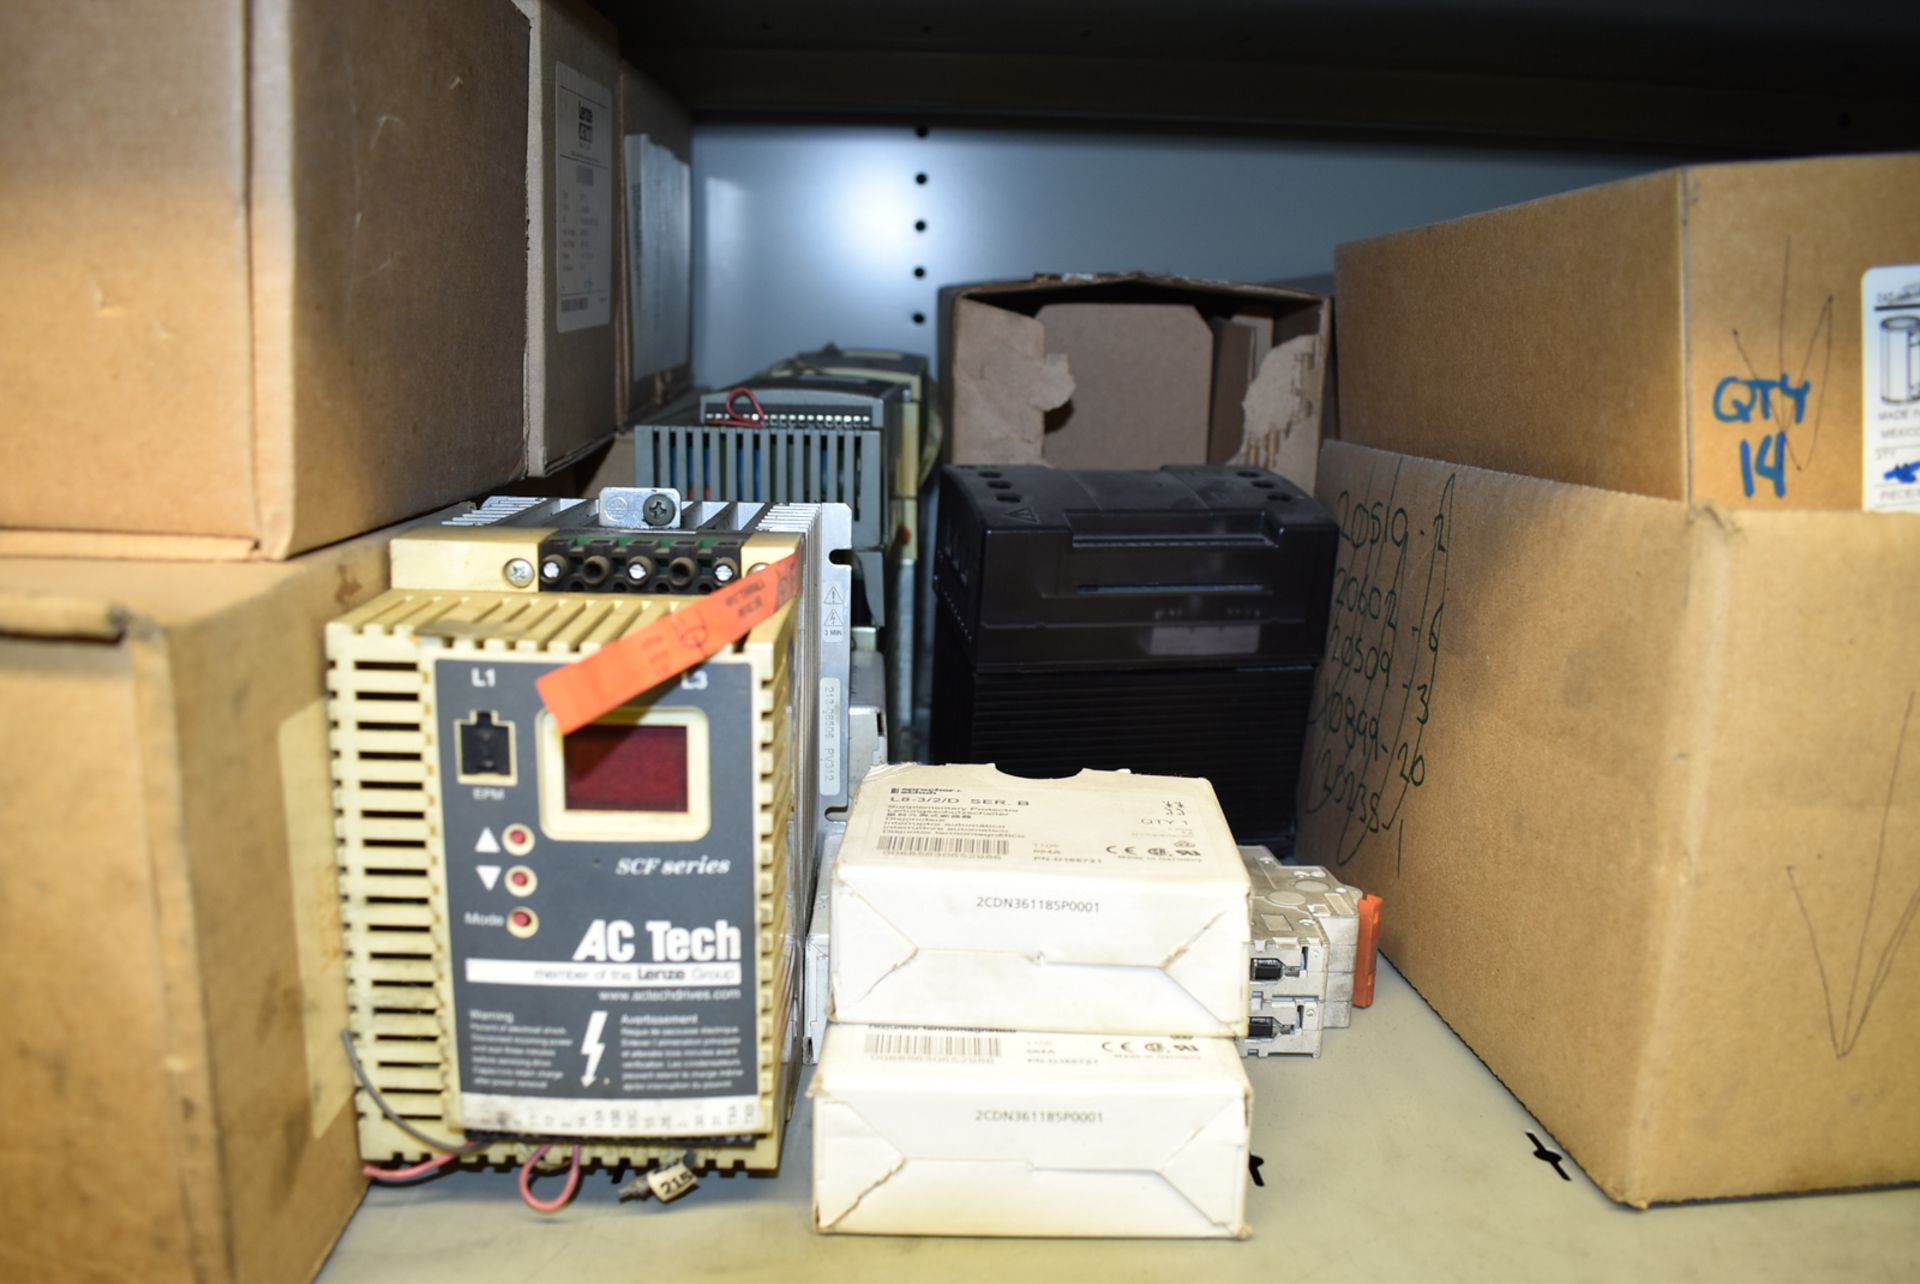 LOT/ CONTENTS OF SHELF INCLUDING CONDUIT JUNCTIONS, SERVO DRIVES, AC DRIVES, SPARE PARTS & MROs - Image 2 of 2